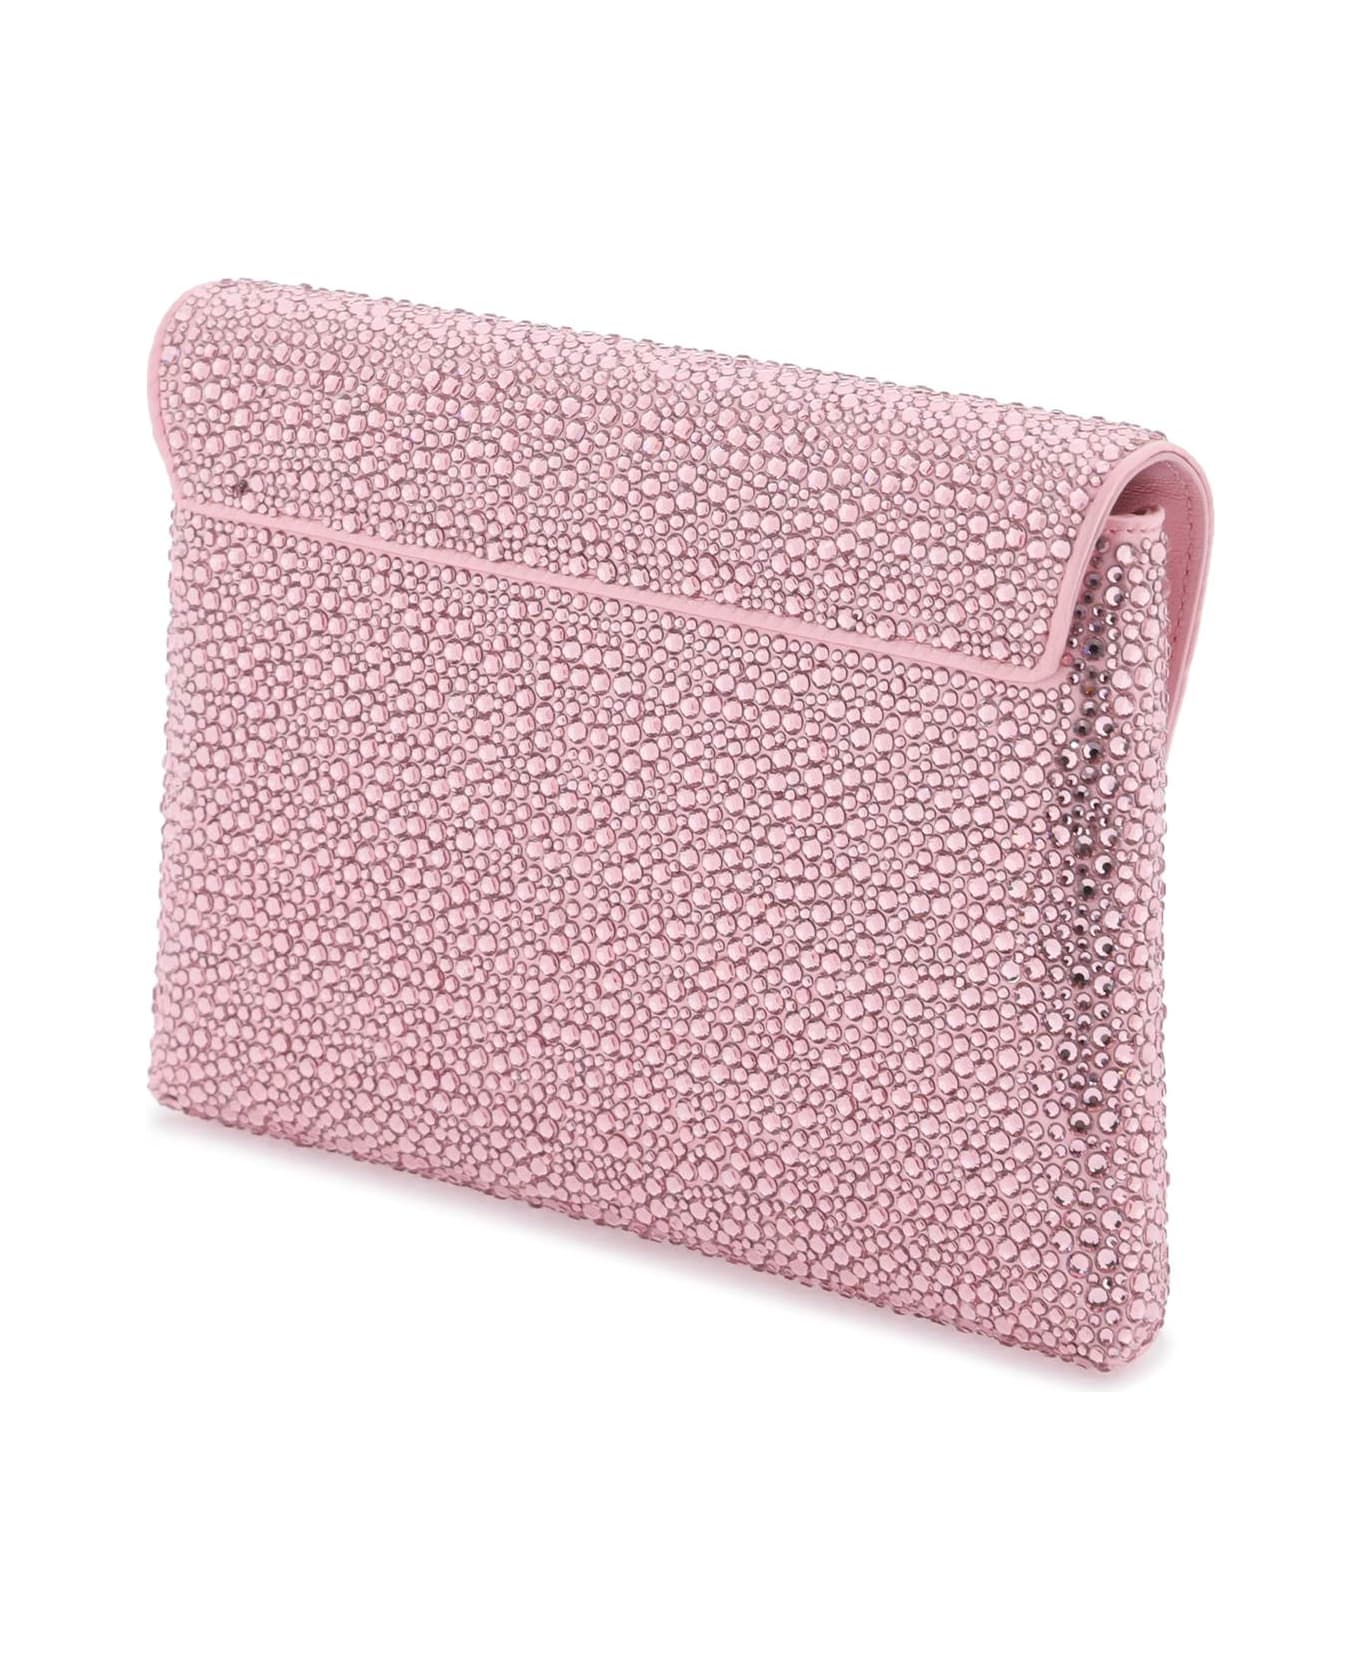 Versace La Medusa Envelope Clutch With Crystals - PALE PINK VERSACE GOLD ショルダーバッグ